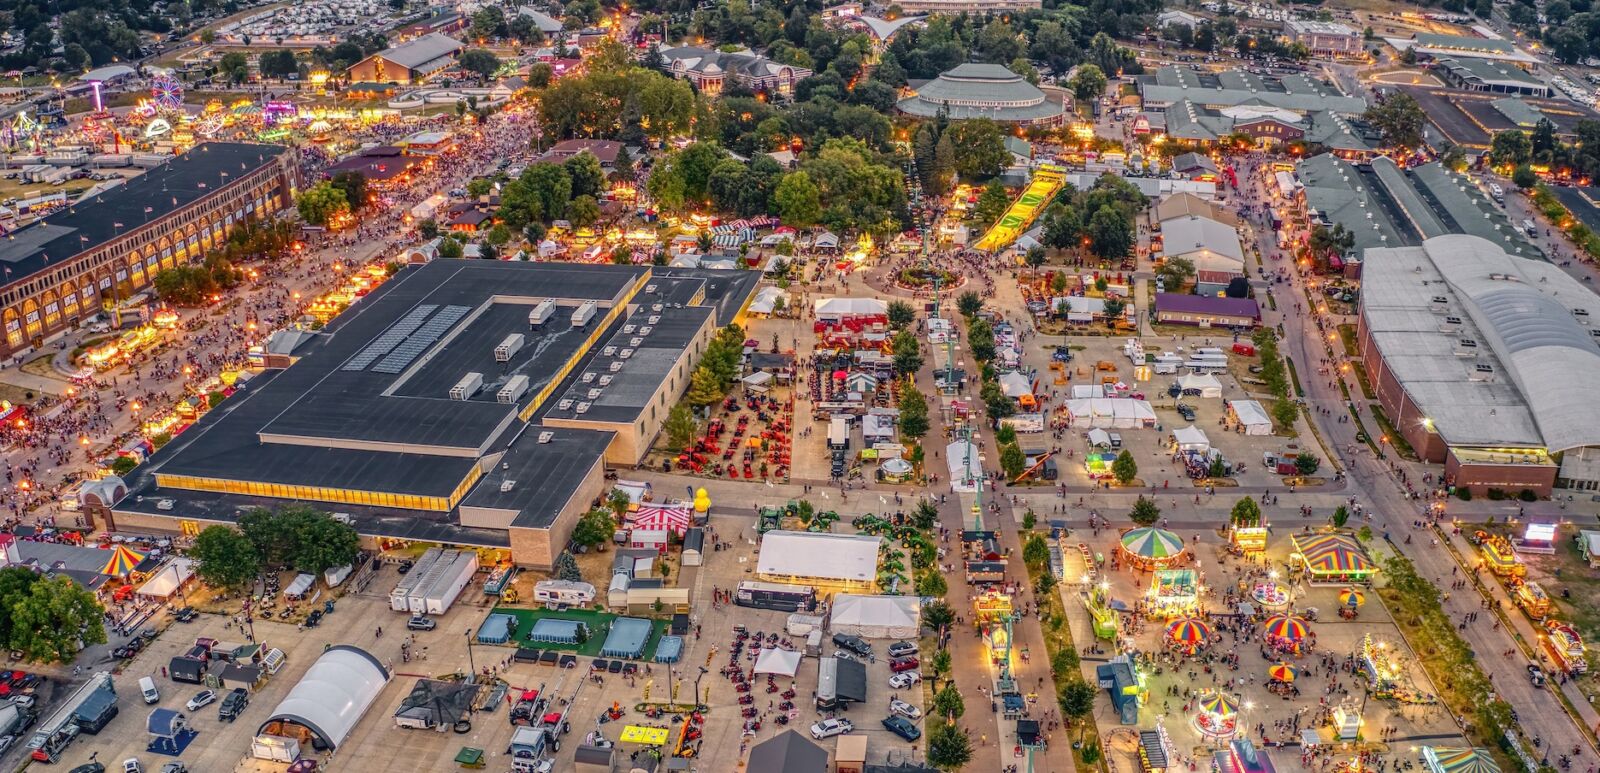 Aerial view of the Iowa State Fair in the Des Moines metro area. Photo via Shutterstock.